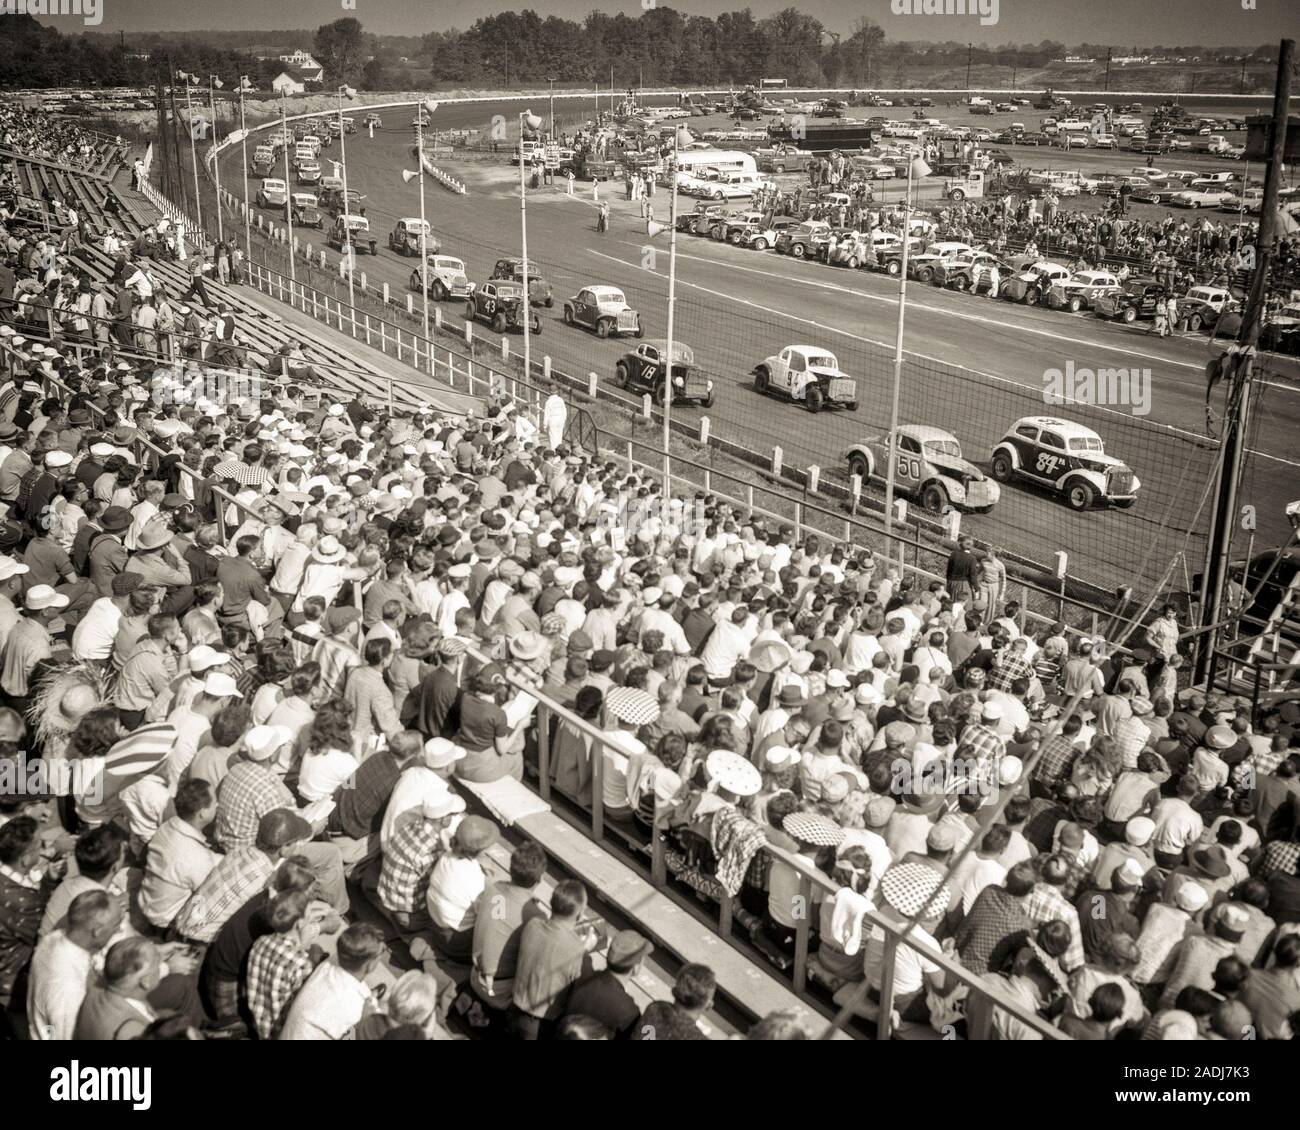 1950s CROWD IN STANDS AT 20 MILE STOCK CAR RACE ON ONE-MILE DIRT TRACK AT LANGHORNE MOTOR SPEEDWAY 1926-1971 PENNSYLVANIA USA - m655 HAR001 HARS TEENAGE GIRL TEENAGE BOY ENTERTAINMENT TRANSPORTATION B&W NORTH AMERICA GOALS NORTH AMERICAN WIDE ANGLE TEMPTATION LEISURE STRENGTH STRATEGY COURAGE AUTOS EXCITEMENT EXTERIOR PA POWERFUL RECREATION PRIDE A AT IN ON THE OCCUPATIONS PROFESSIONAL SPORTS MOTION BLUR CONCEPTUAL AUTOMOBILES STYLISH VEHICLES BUCKS COUNTY STANDS FANS LANGHORNE PRECISION TOGETHERNESS BLACK AND WHITE HAR001 OLD FASHIONED Stock Photo